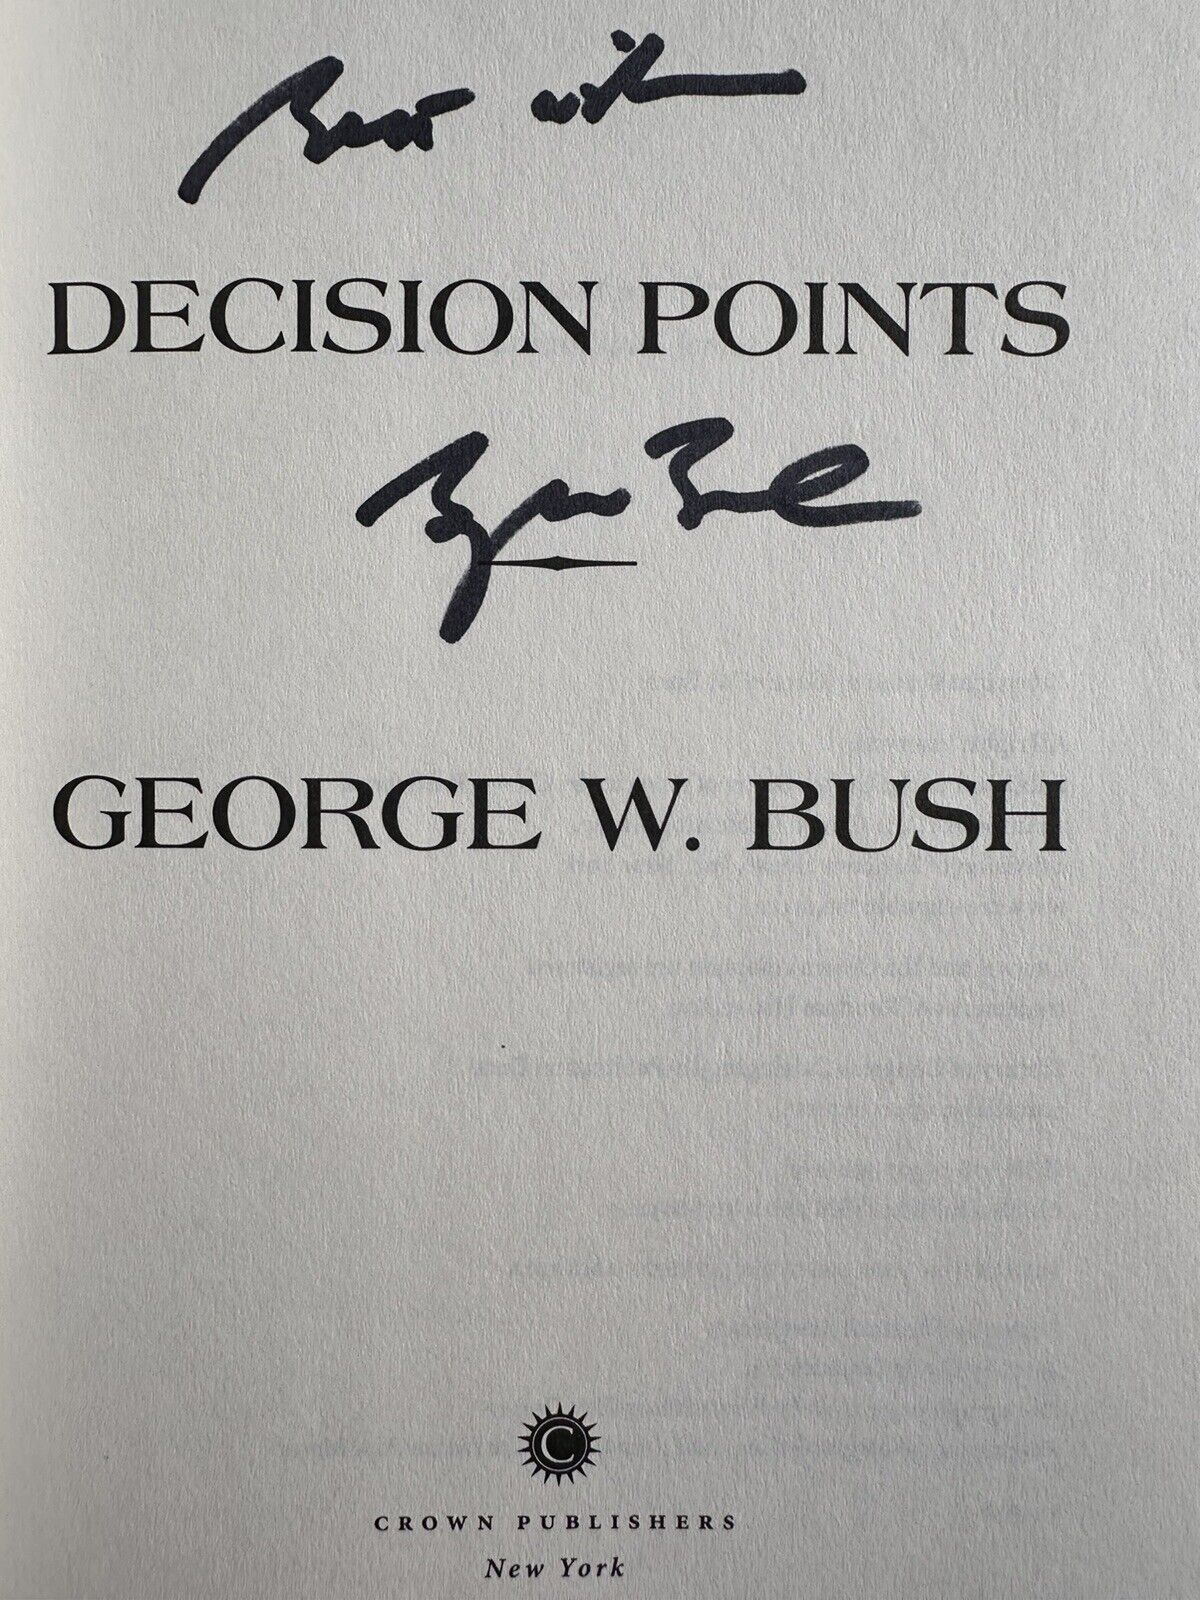 Signed President George W. Bush “DECISION POINTS” Auto Hard Cover Book